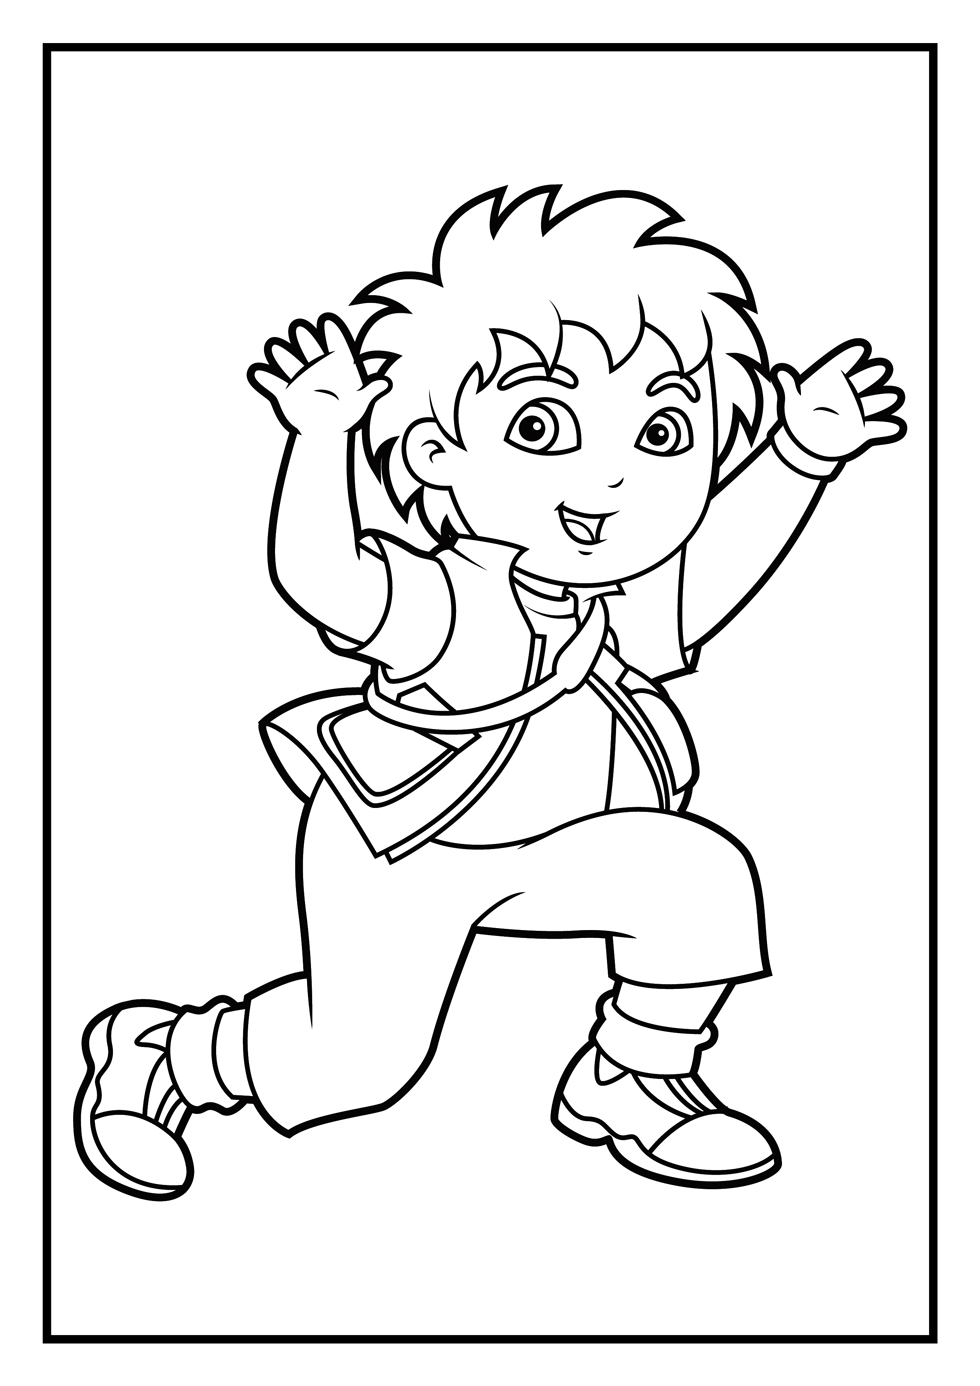 Dora Coloring Pages Diego Coloring Pages